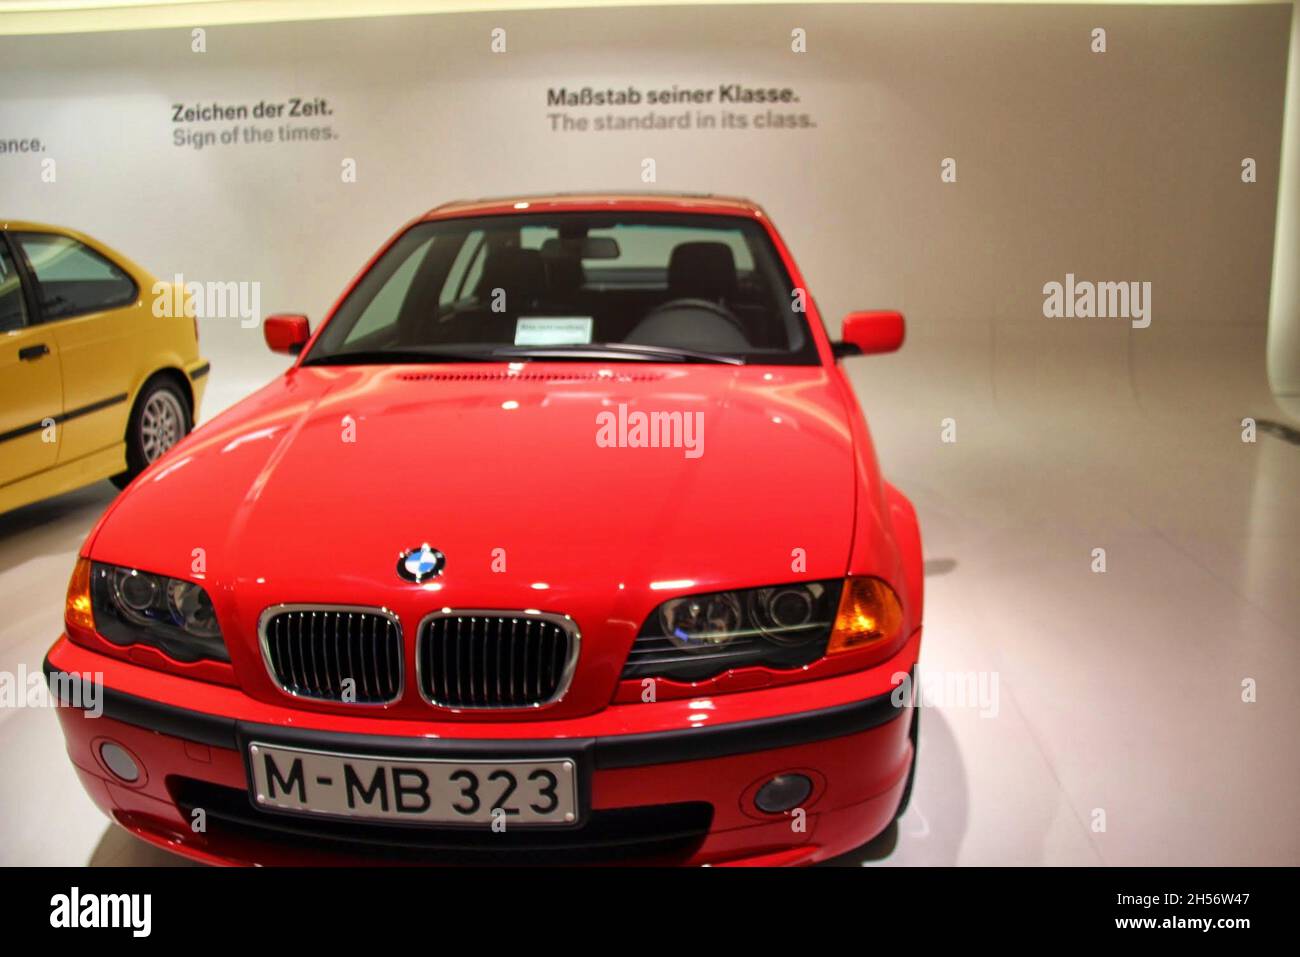 File:BMW E46 front 20080822.jpg - Wikimedia Commons